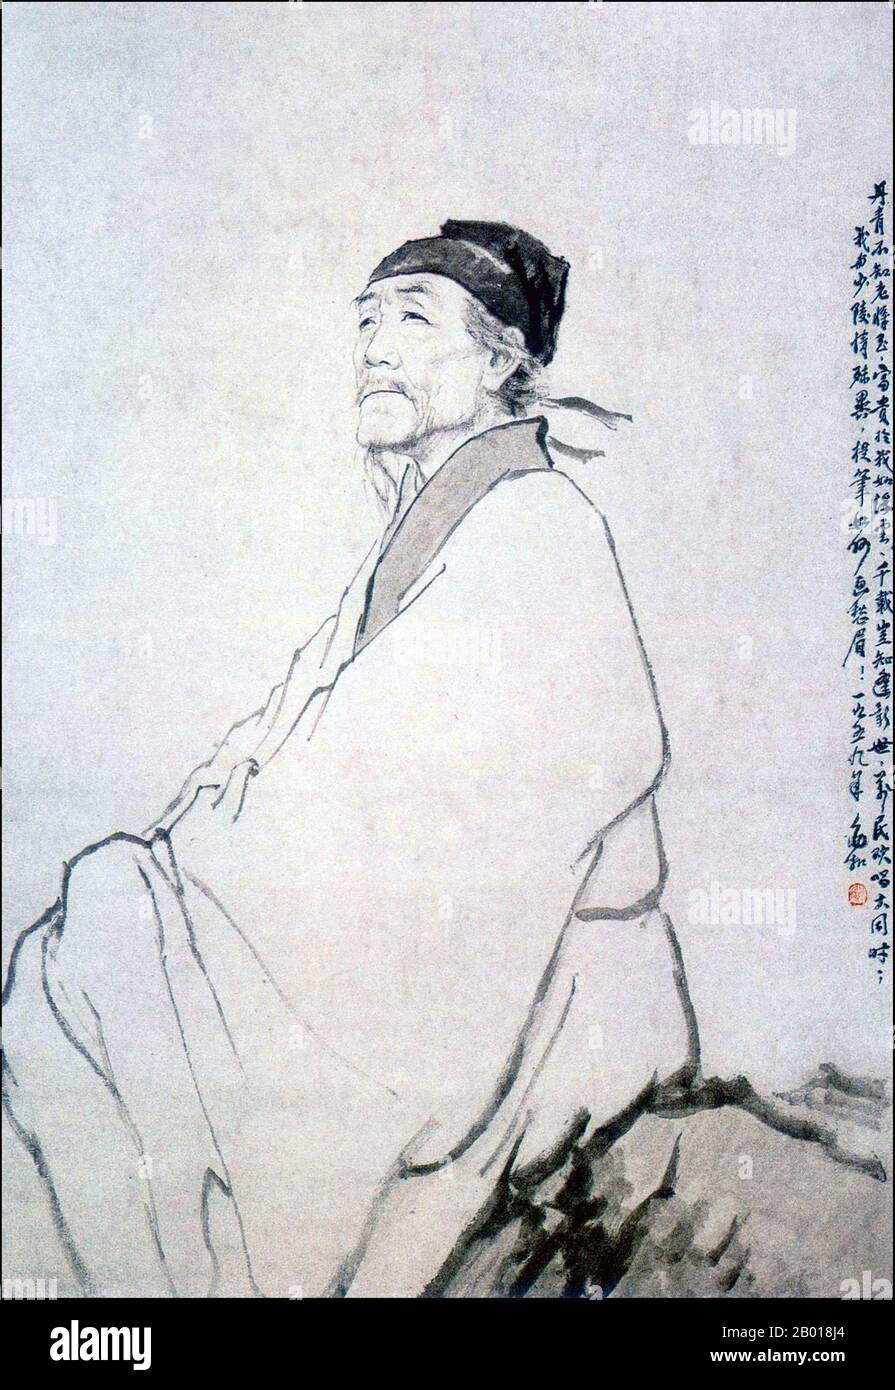 Du Fu was a prominent Chinese poet of the Tang Dynasty. Along with Li Bai (Li Bo), he is frequently called the greatest of the Chinese poets. His greatest ambition was to serve his country as a successful civil servant, but he proved unable to make the necessary accommodations. His life, like the whole country, was devastated by the An Lushan Rebellion of 755, and his last 15 years were a time of almost constant unrest.  Although initially he was little known to other writers, his works came to be hugely influential in both Chinese and Japanese literary culture. Of his poetic writing, nearly f Stock Photo